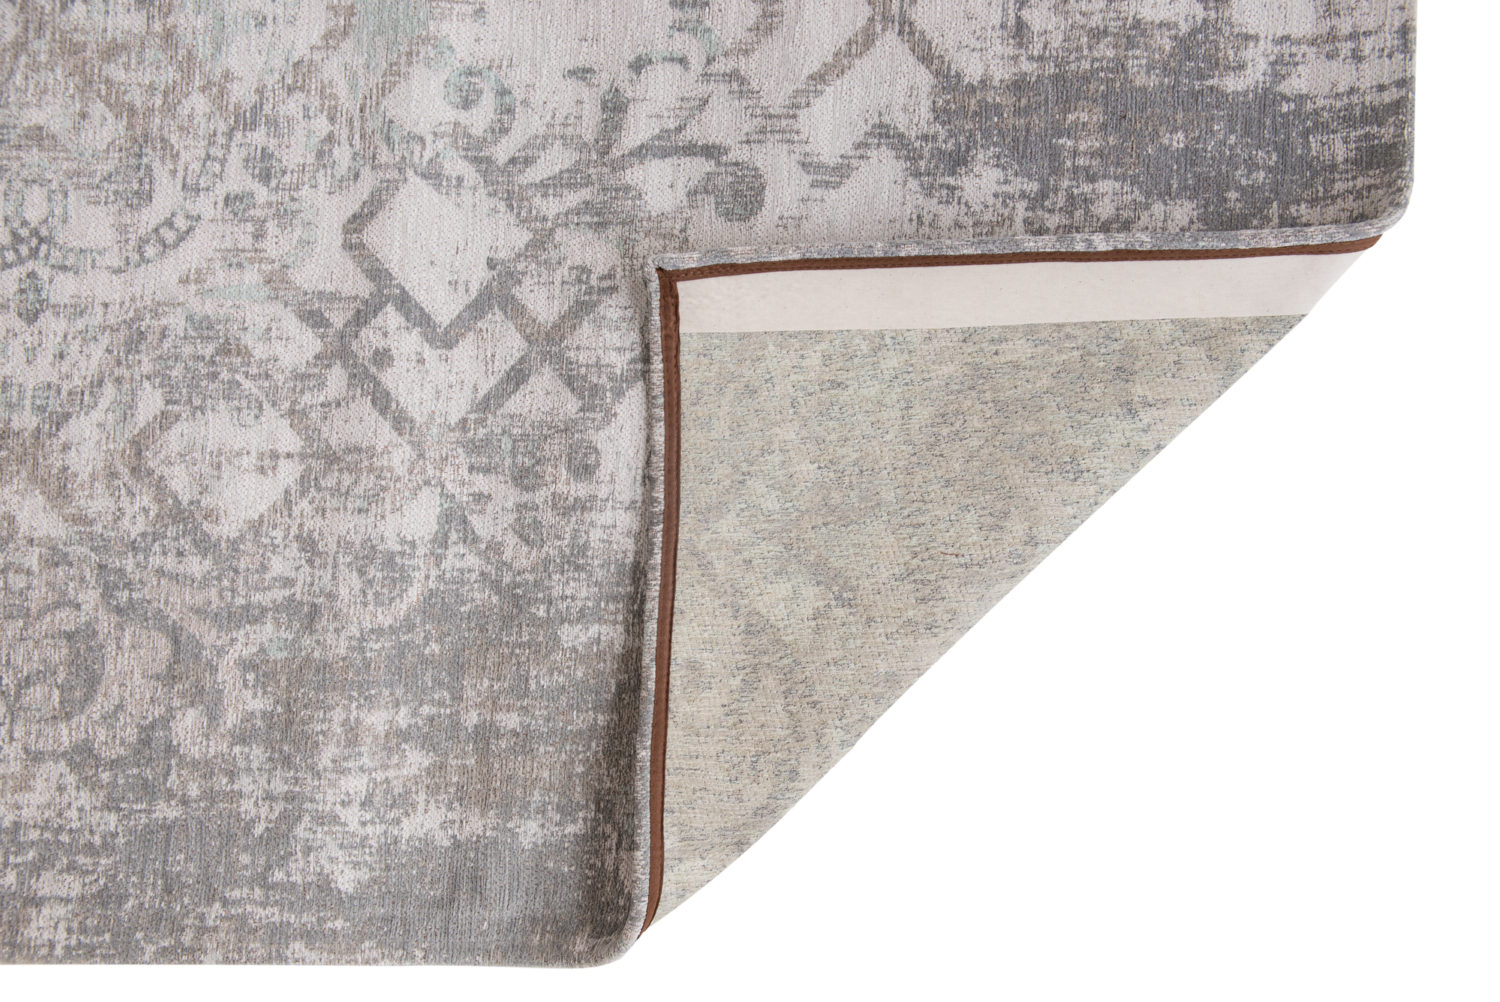 Multi-layered composition of floral, Arabic geometric and distressed elements, set in soft hues